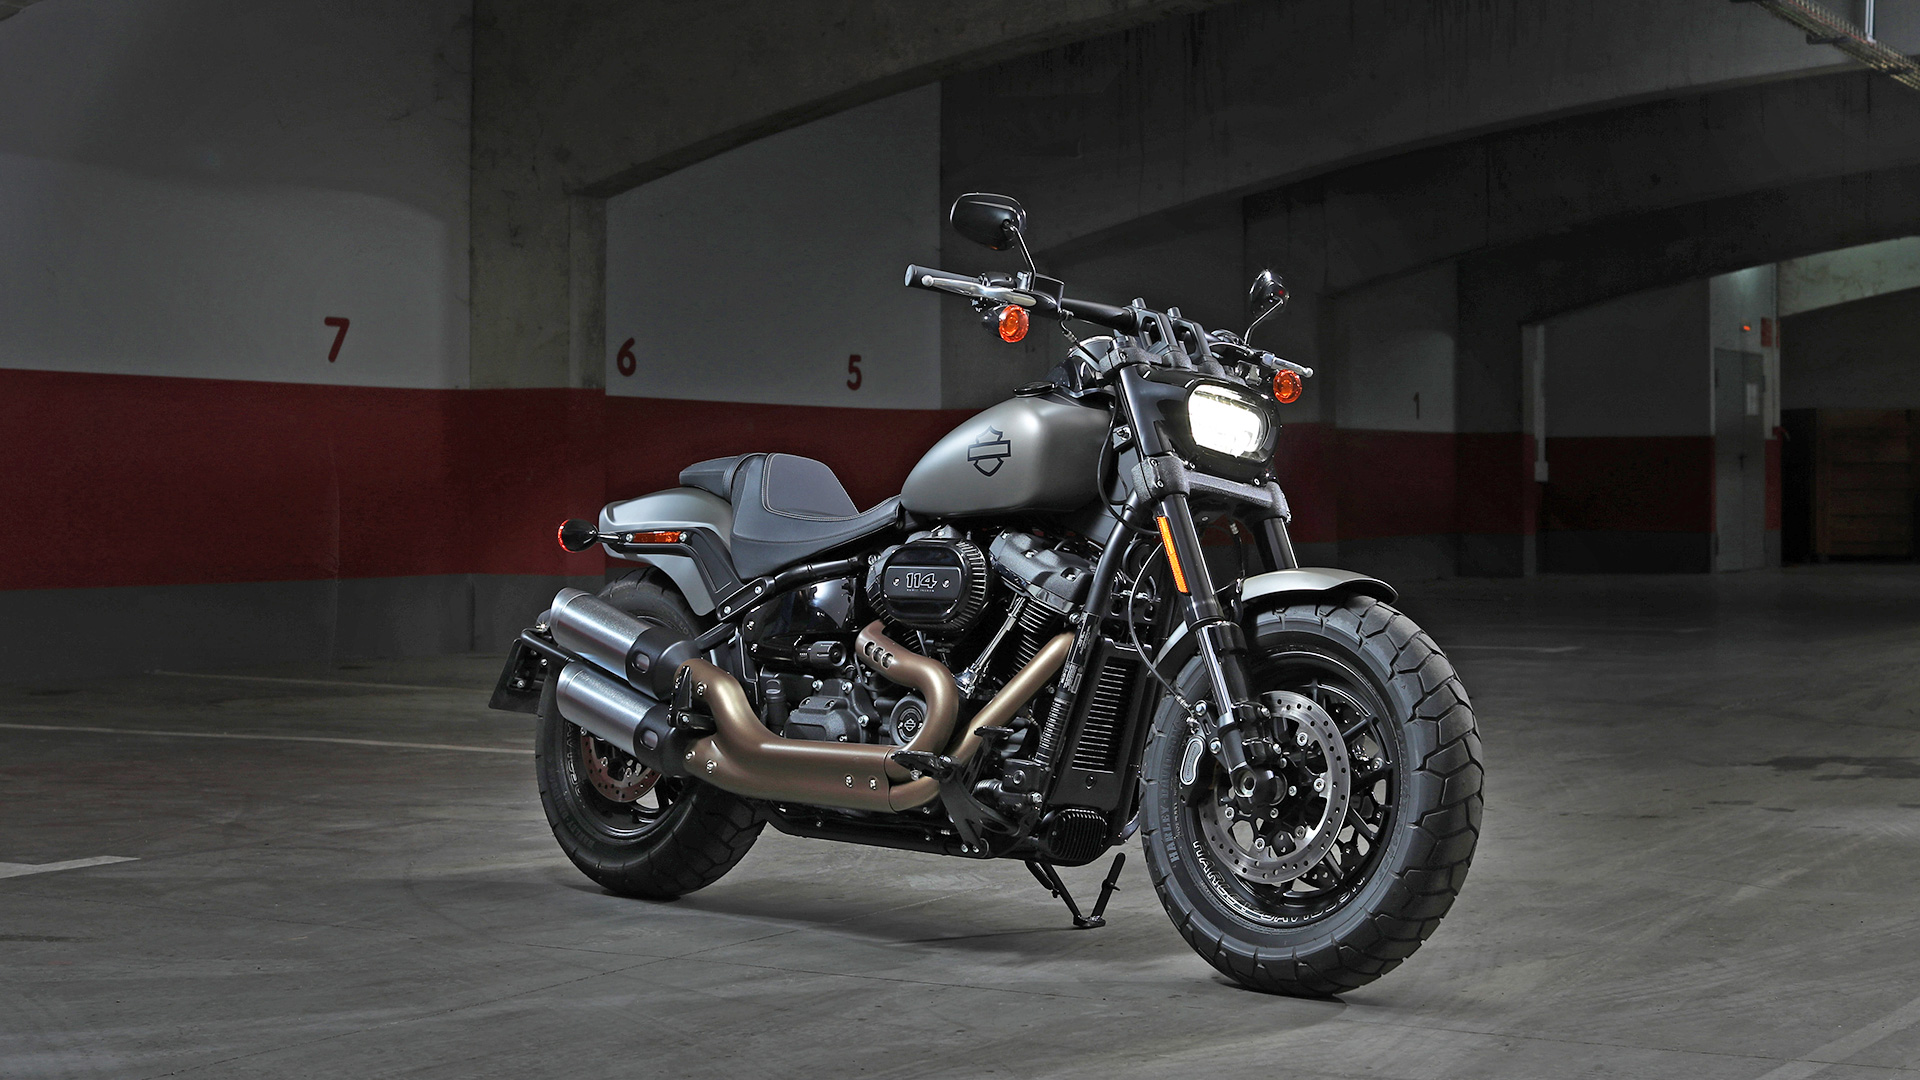 Harley Davidson Fat Bob 2018 Price Mileage Reviews Specification Gallery Overdrive